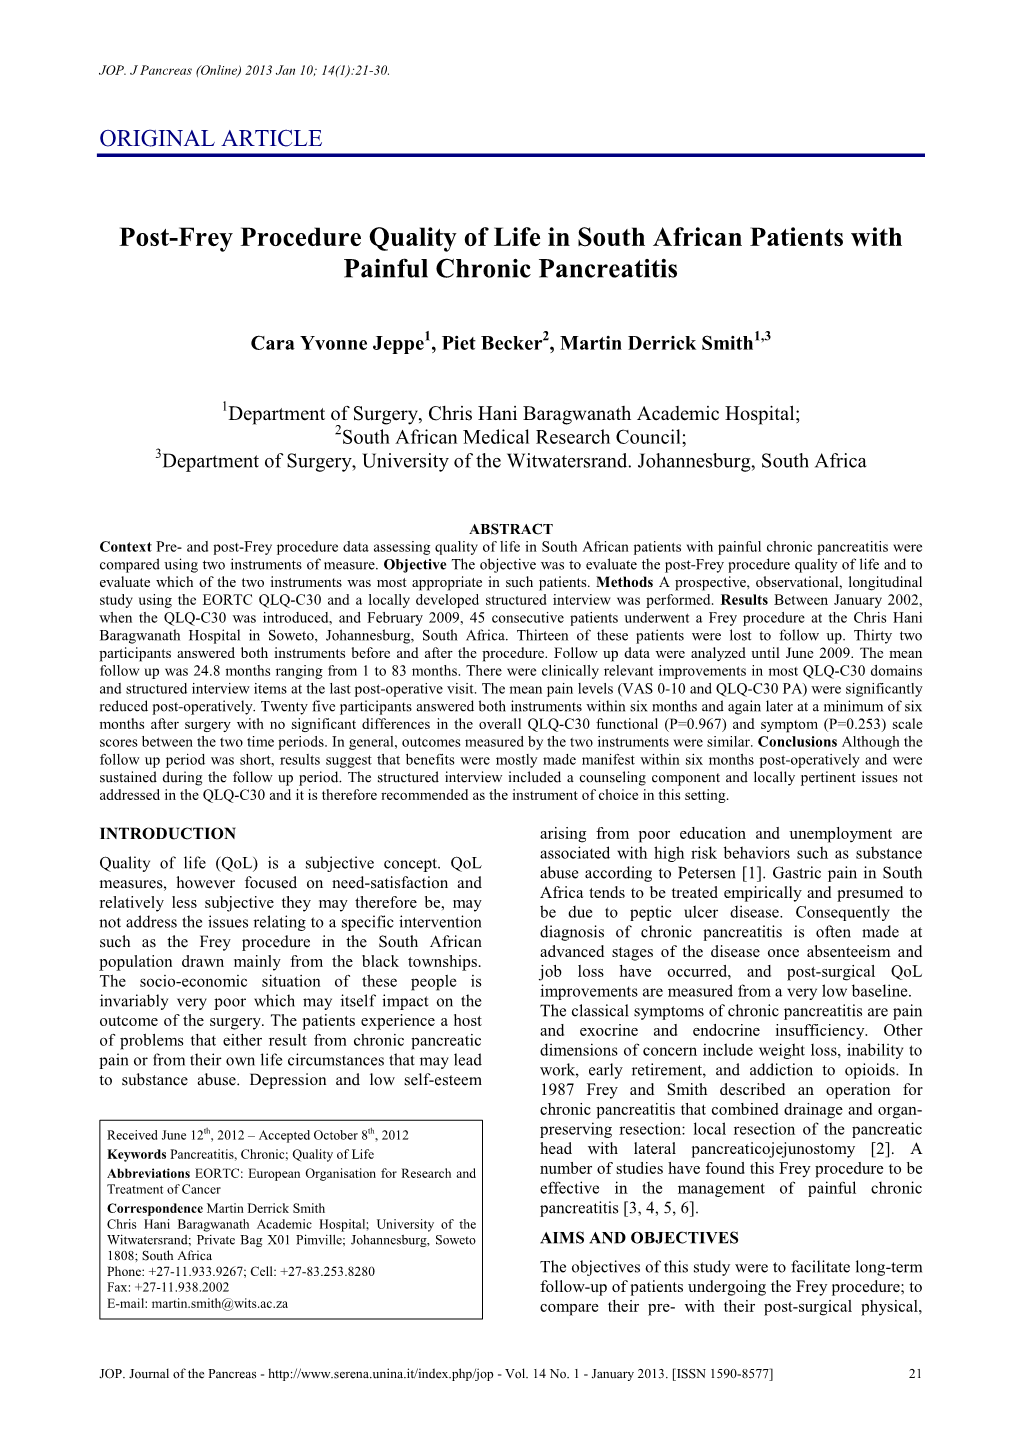 Post-Frey Procedure Quality of Life in South African Patients with Painful Chronic Pancreatitis